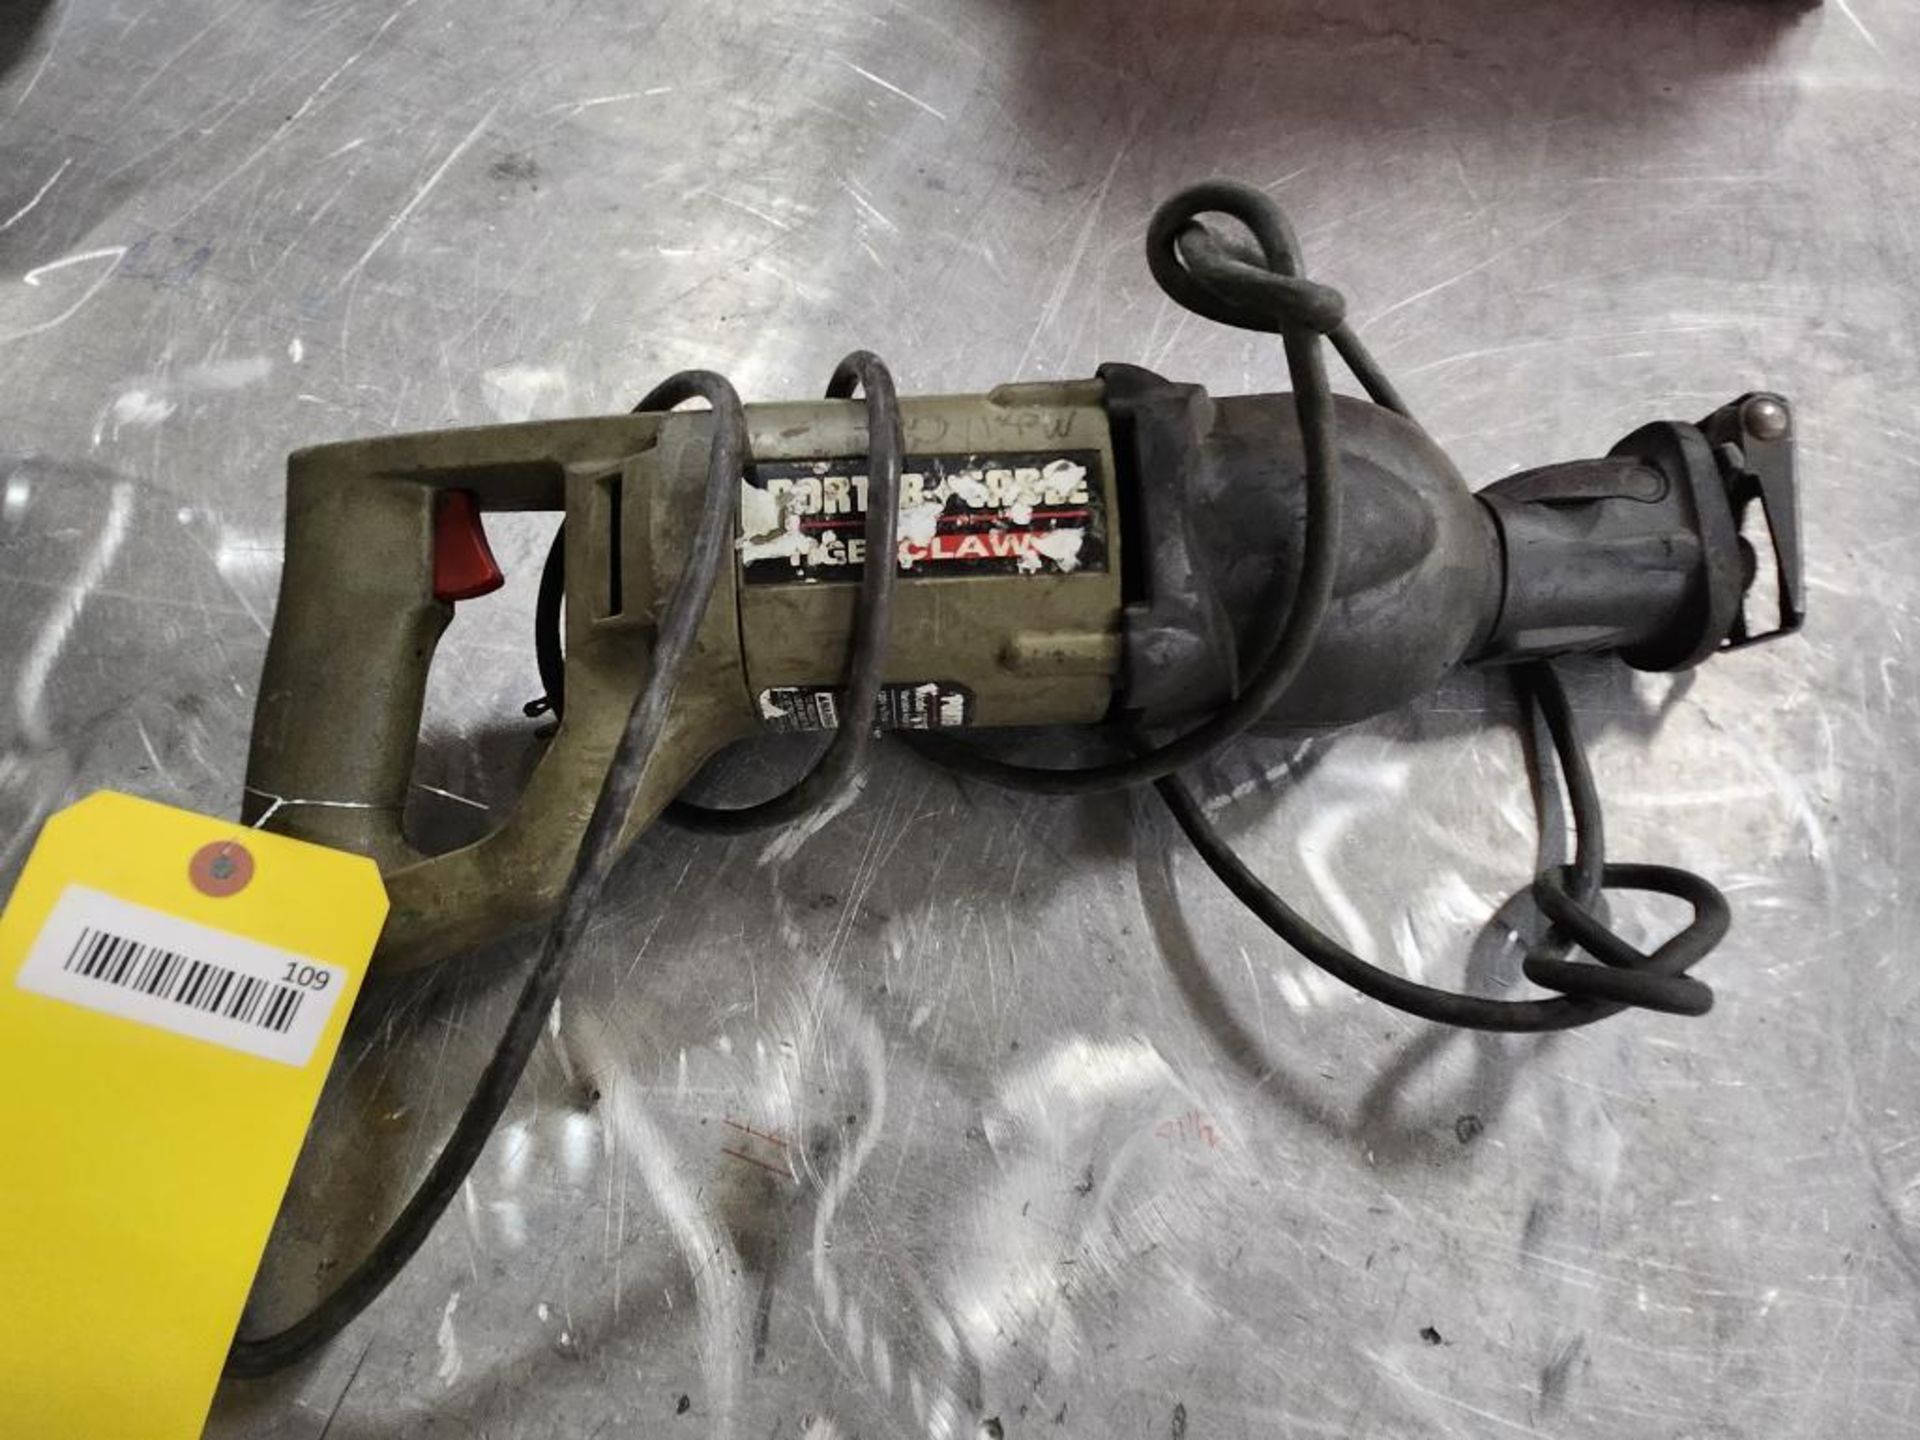 Porter Cable Tiger Saw, Reciprocating Saw, Model 740, S/N 073910A3041 - Image 2 of 2